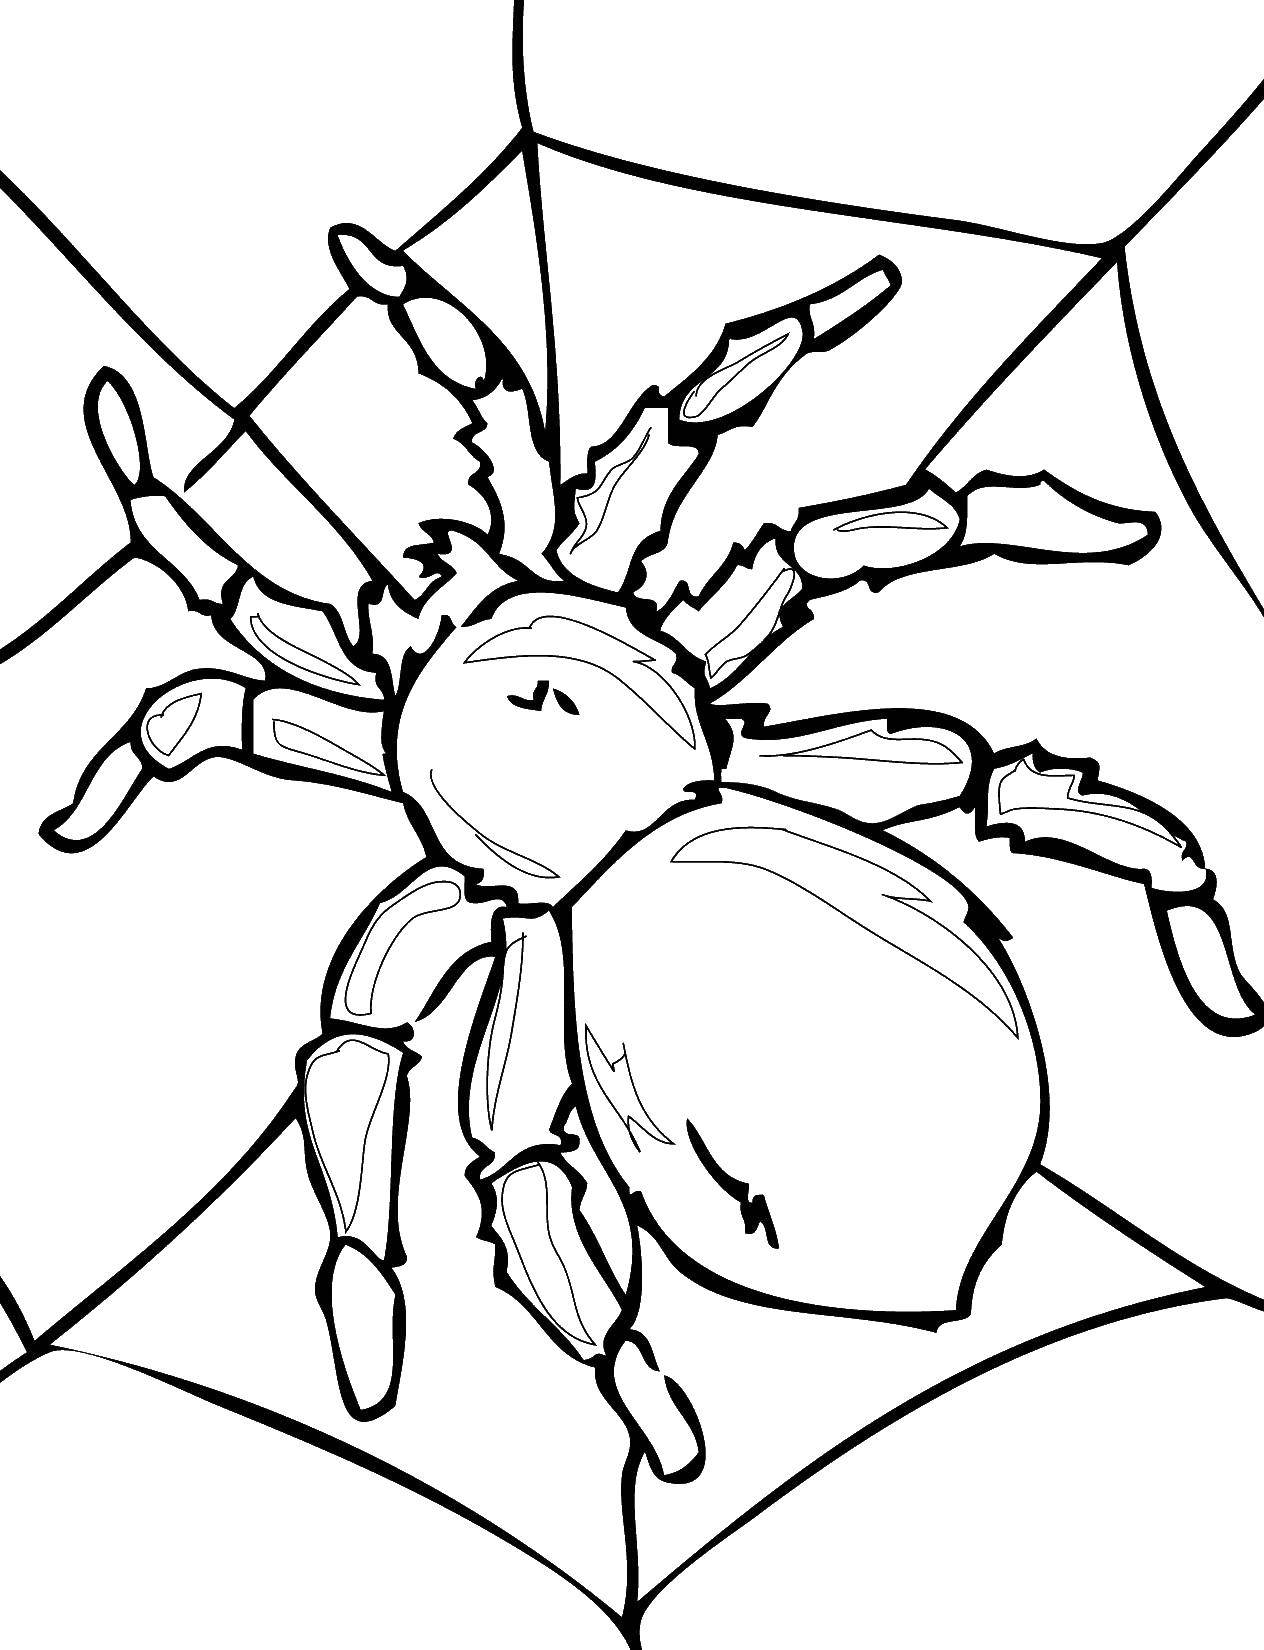 Coloring A big spider on the web. Category Insects. Tags:  Insects, spider.